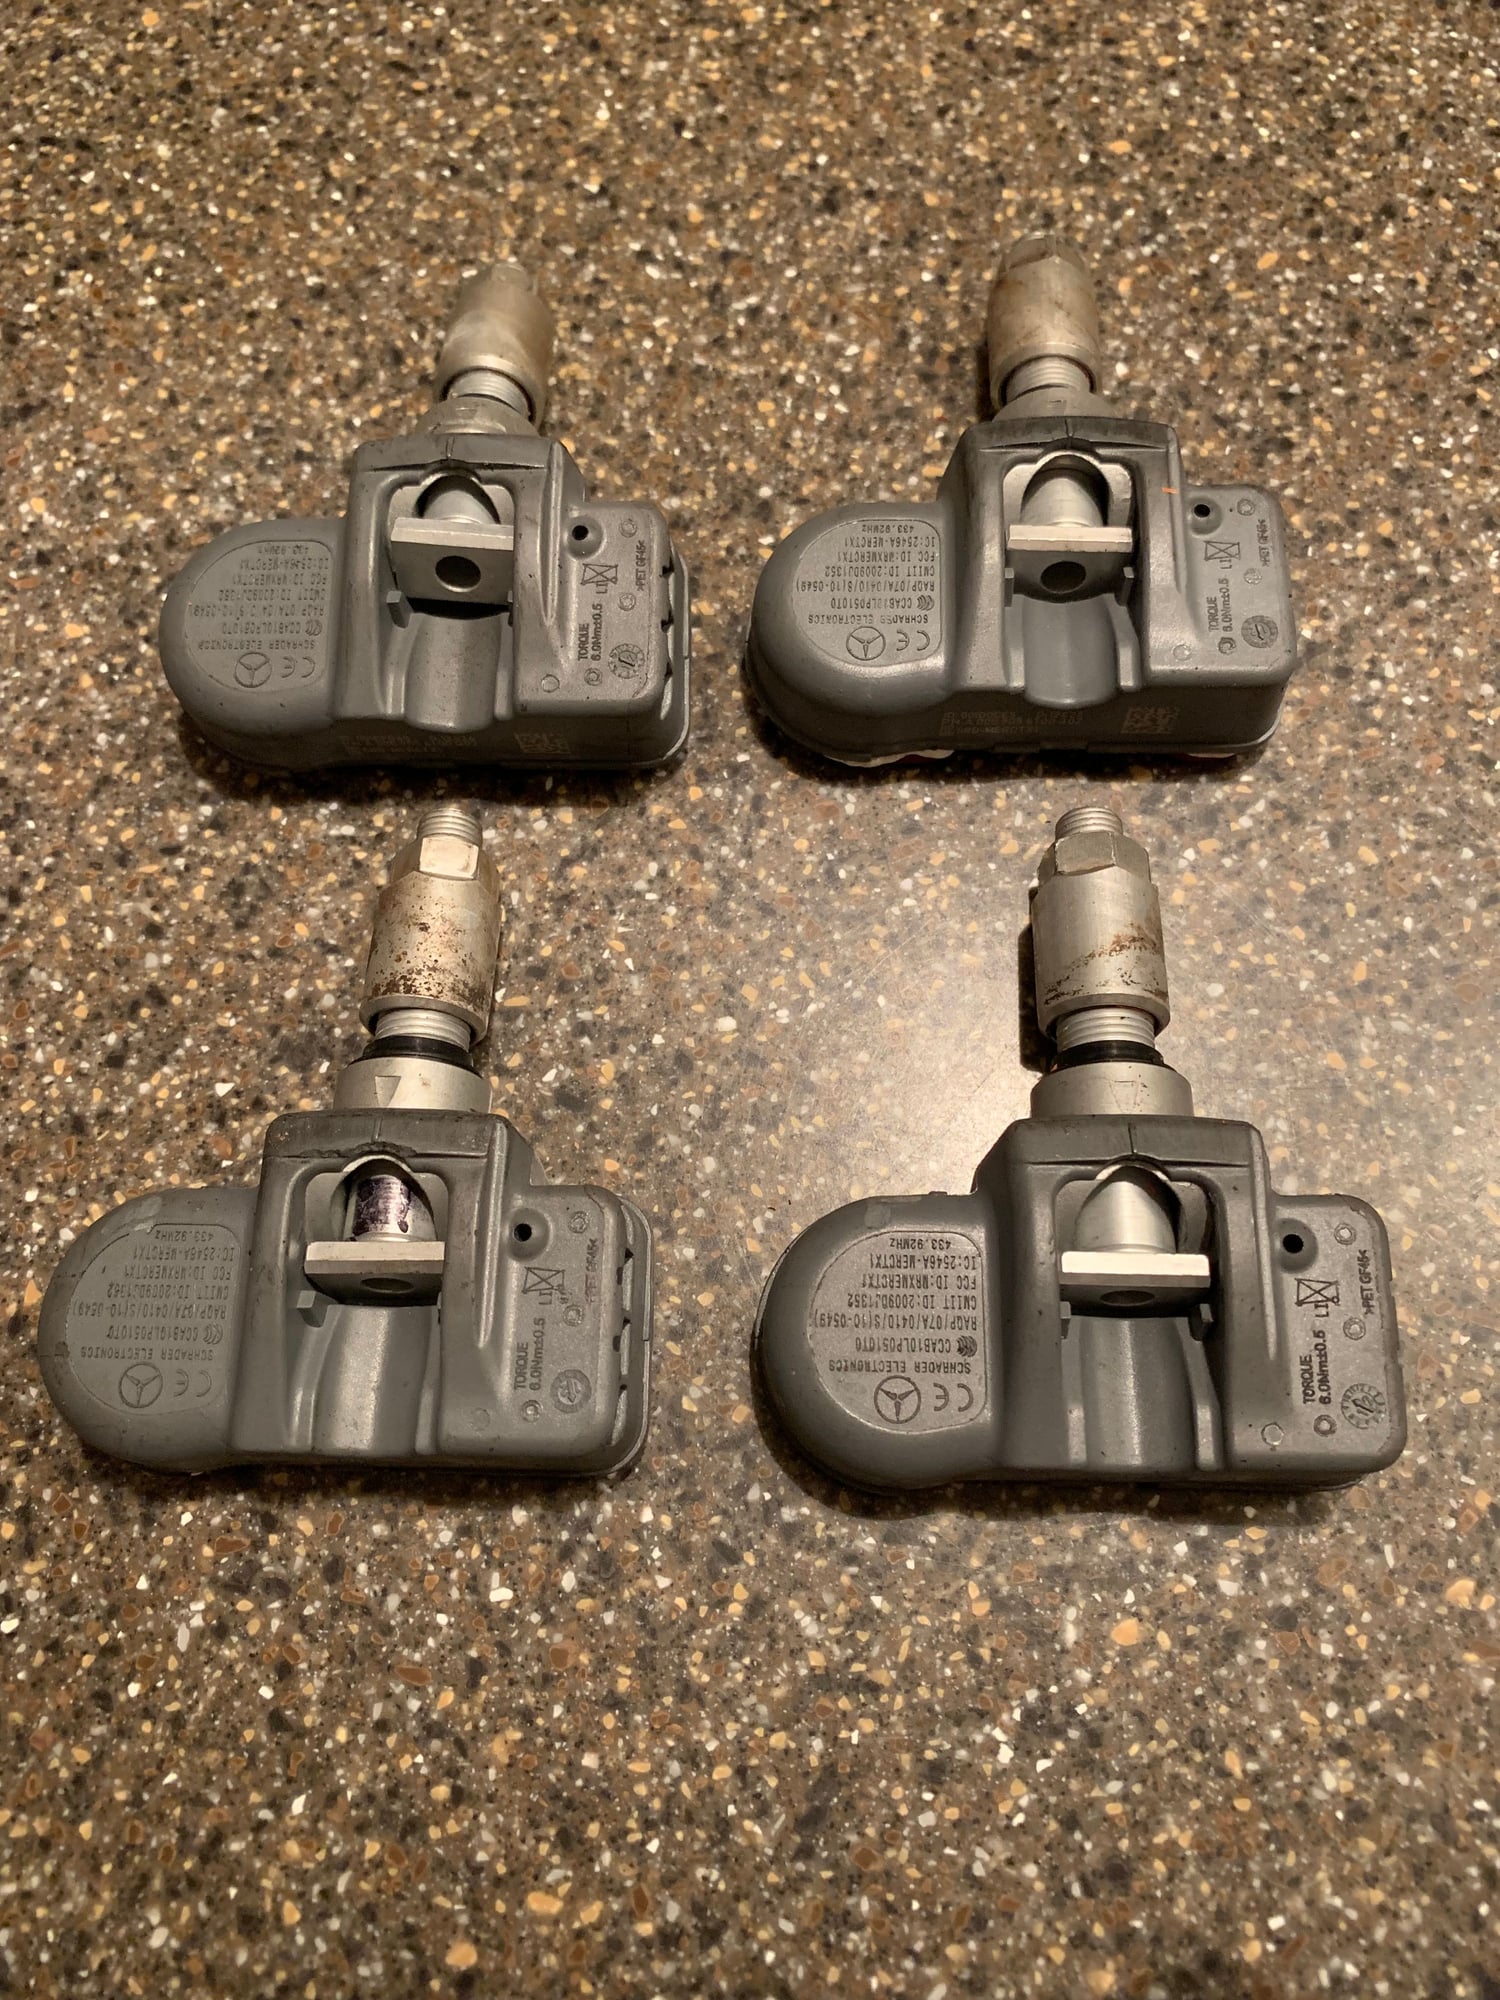 Wheels and Tires/Axles - FS OEM MERCEDES BENZ TPMS SENSORS - Used - All Years Mercedes-Benz All Models - Geneva, IL 60134, United States